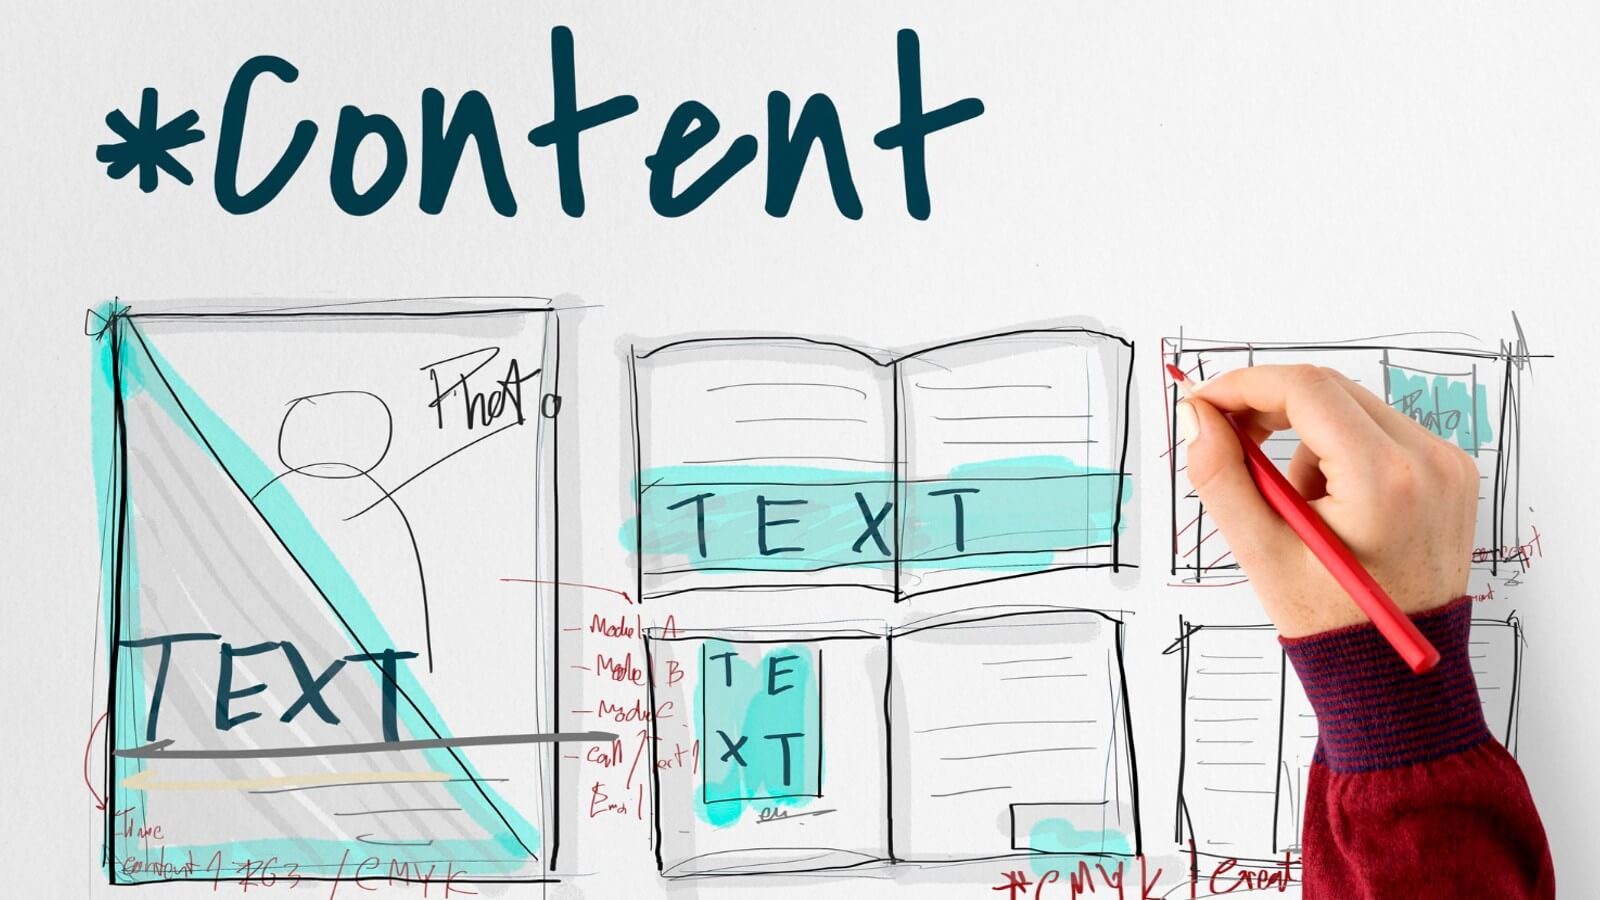 Hire content writing services India